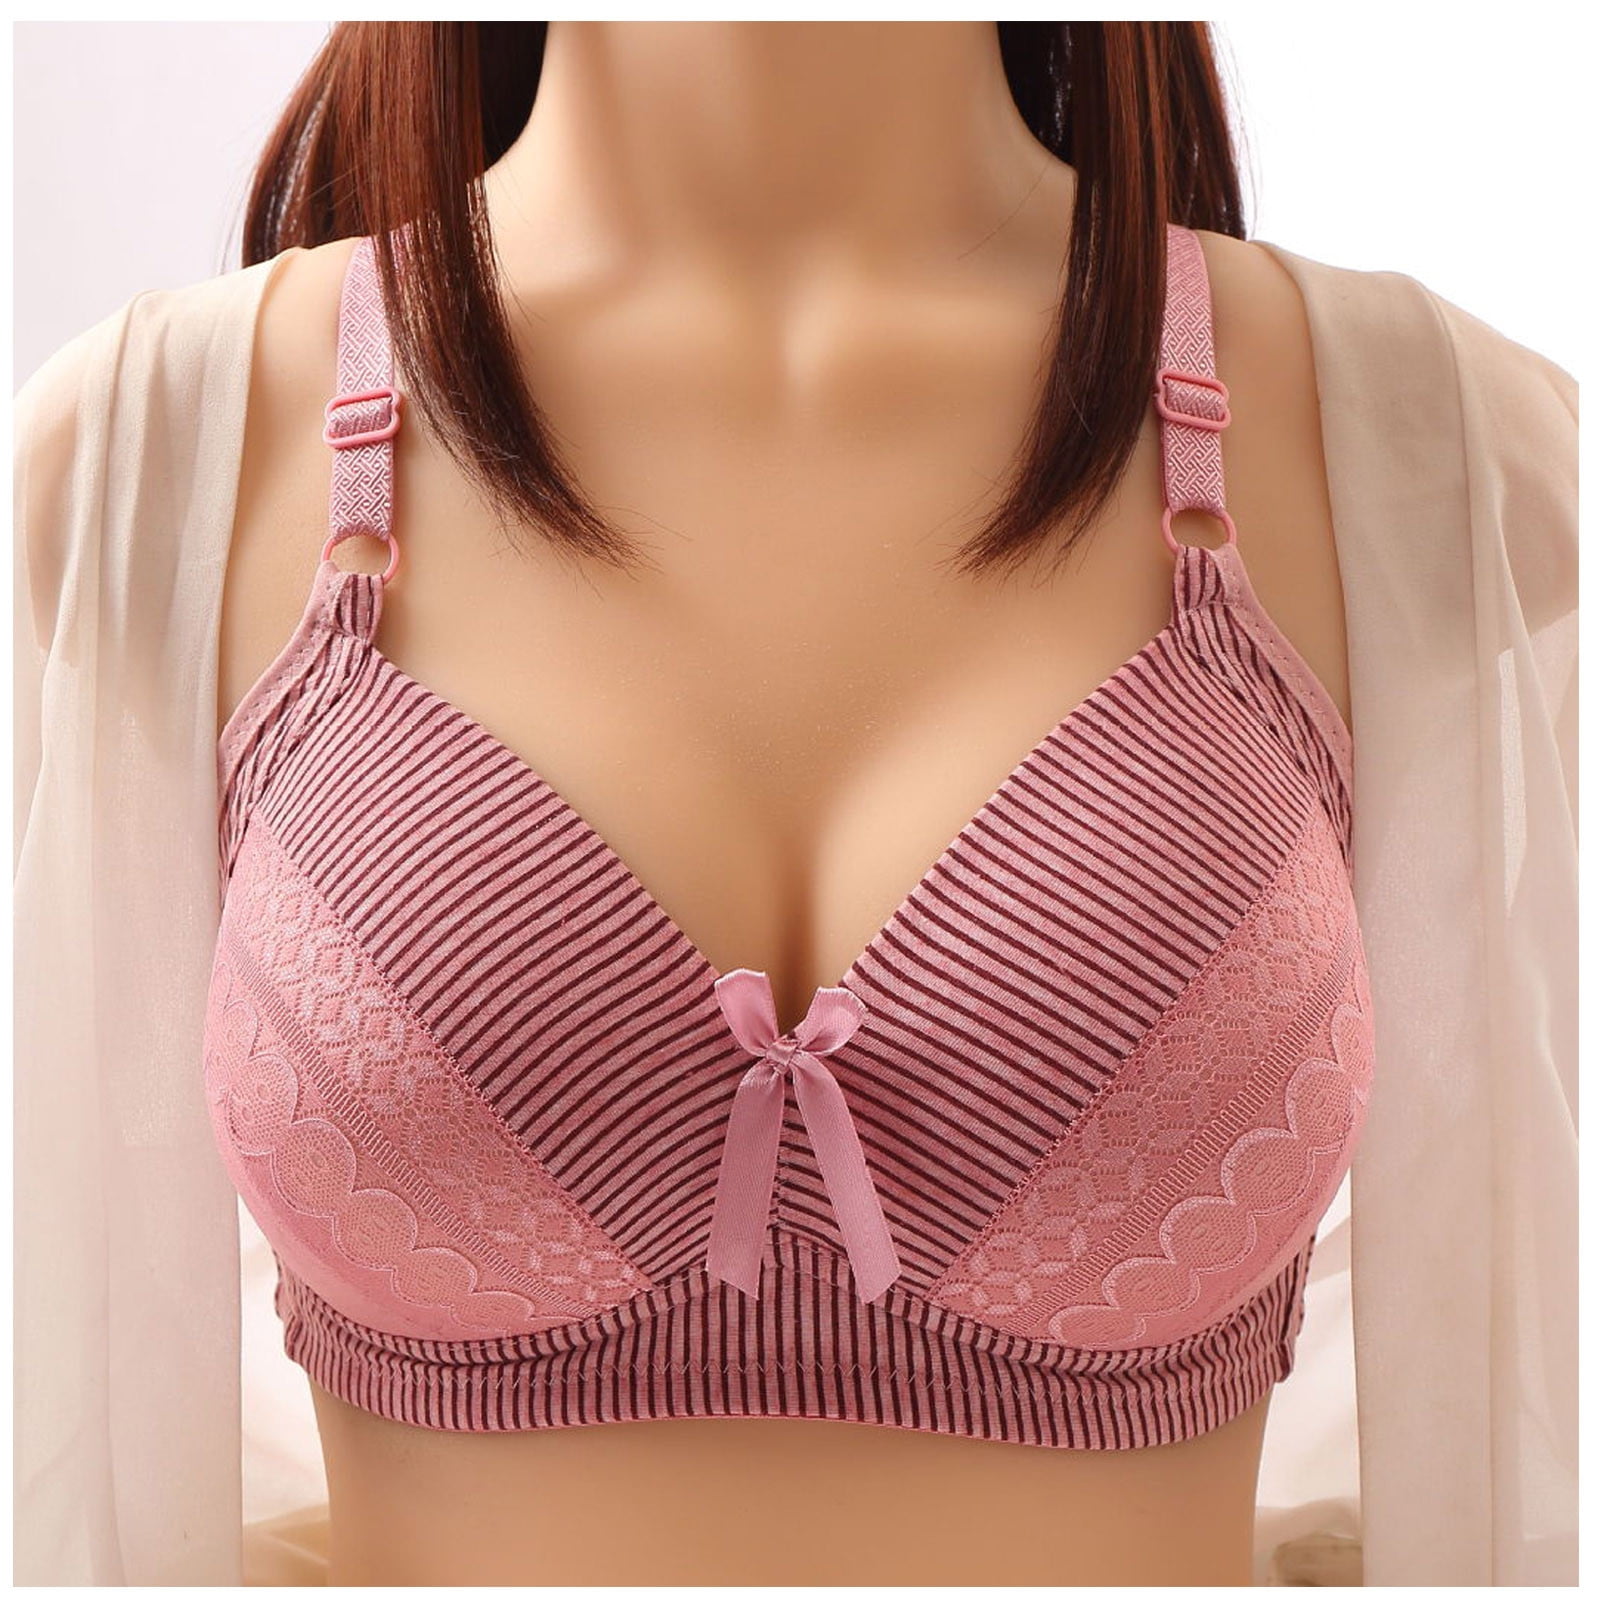 FAFWYP Women's Sexy Plus Size Push Up Wireless Bras for Large Bust